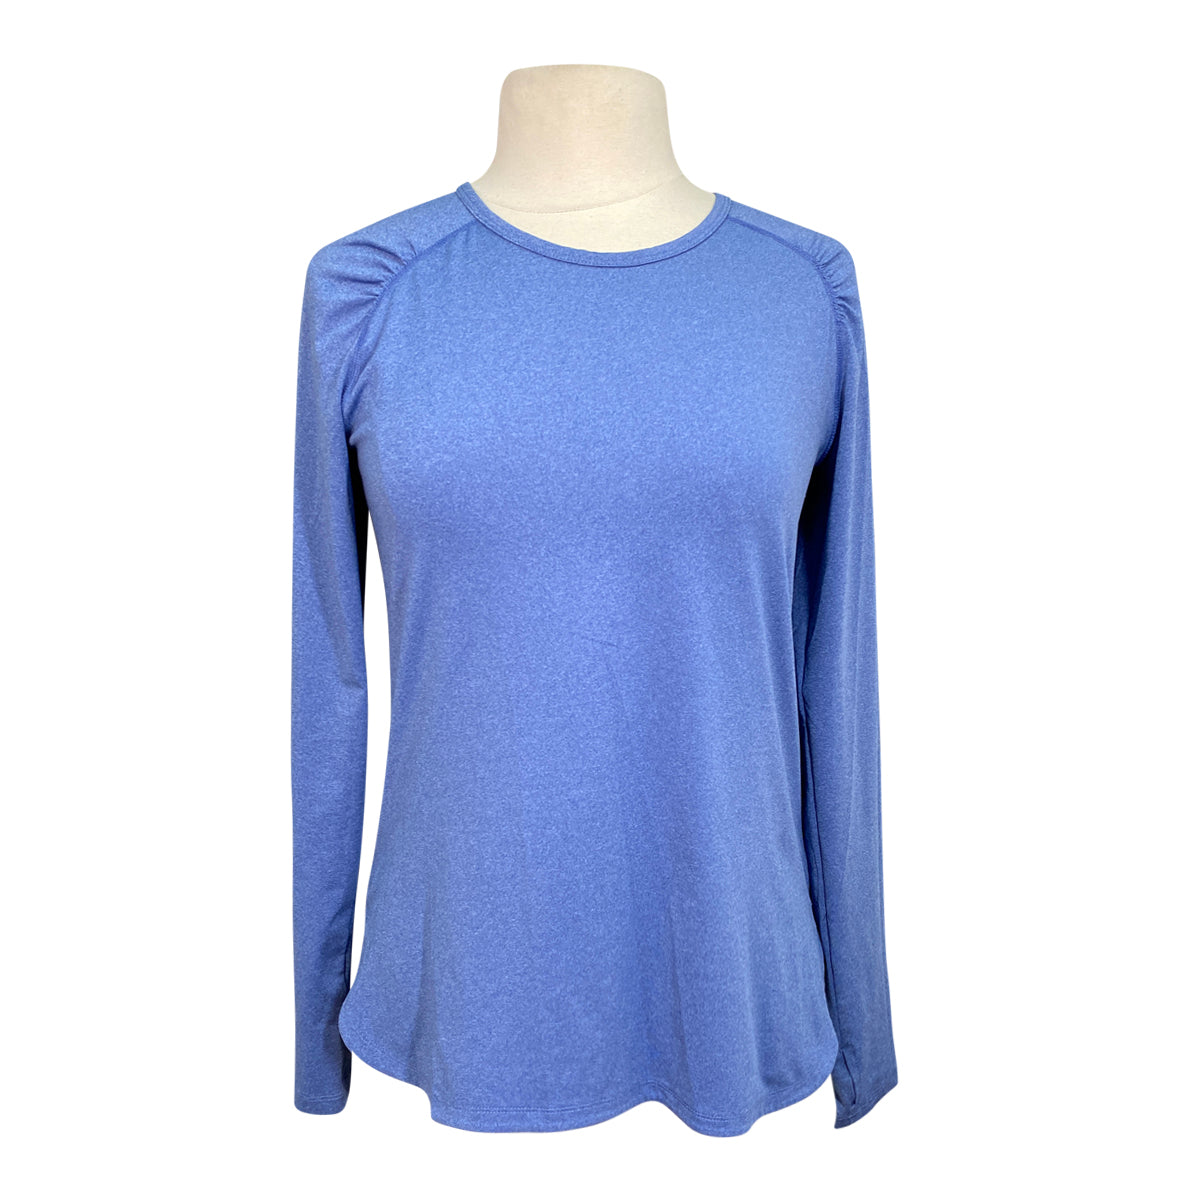 Noble Outfitters Long Sleeve Crew Training Shirt in Periwinkle